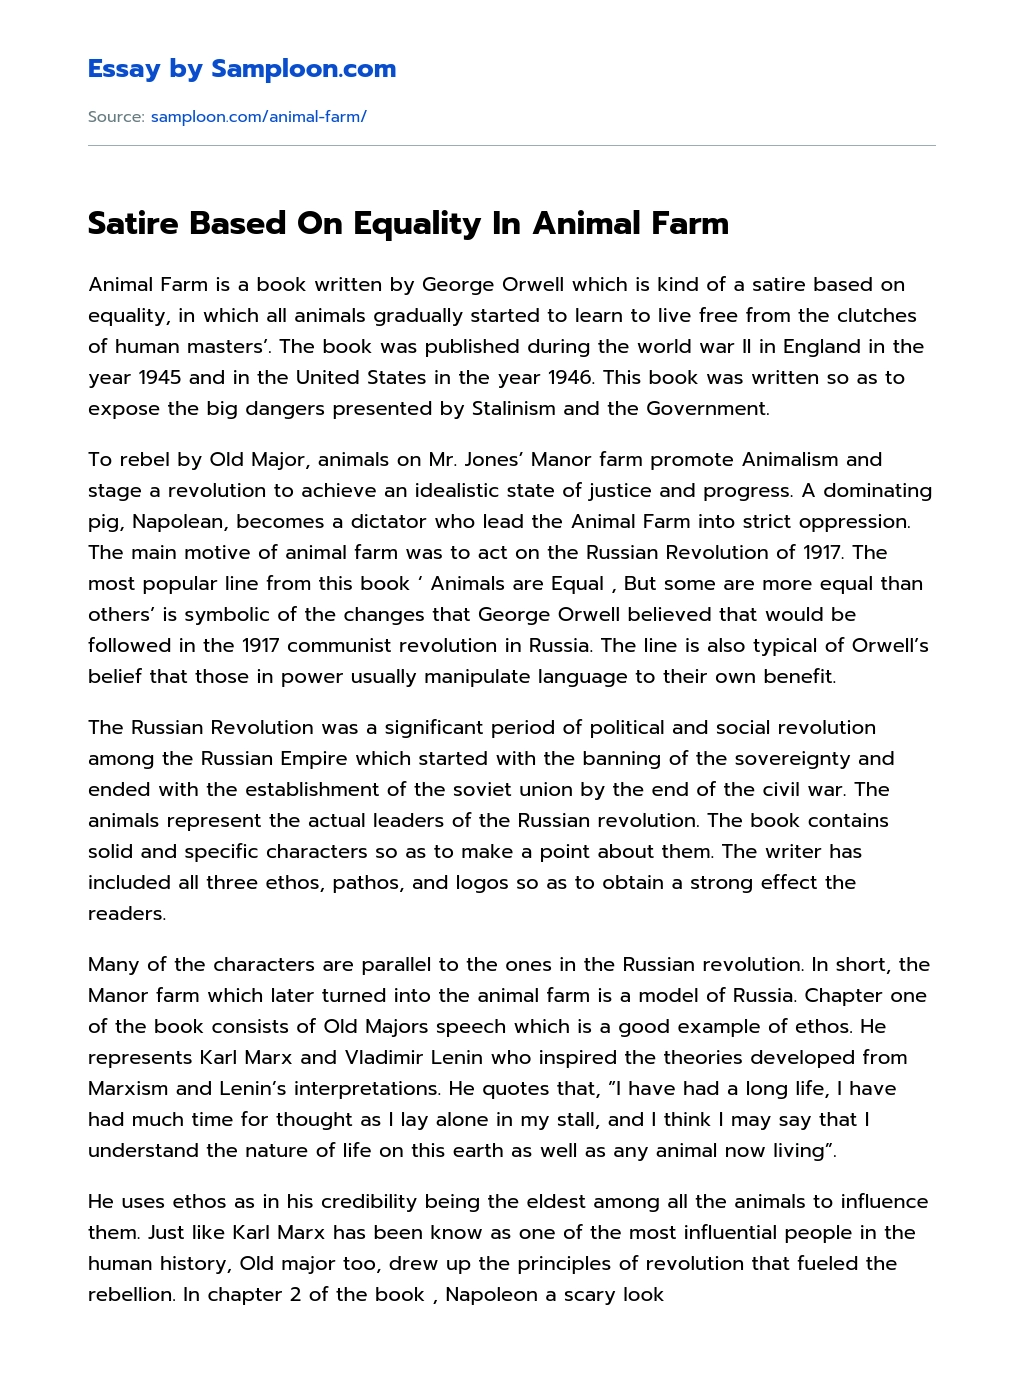 Satire Based On Equality In Animal Farm essay